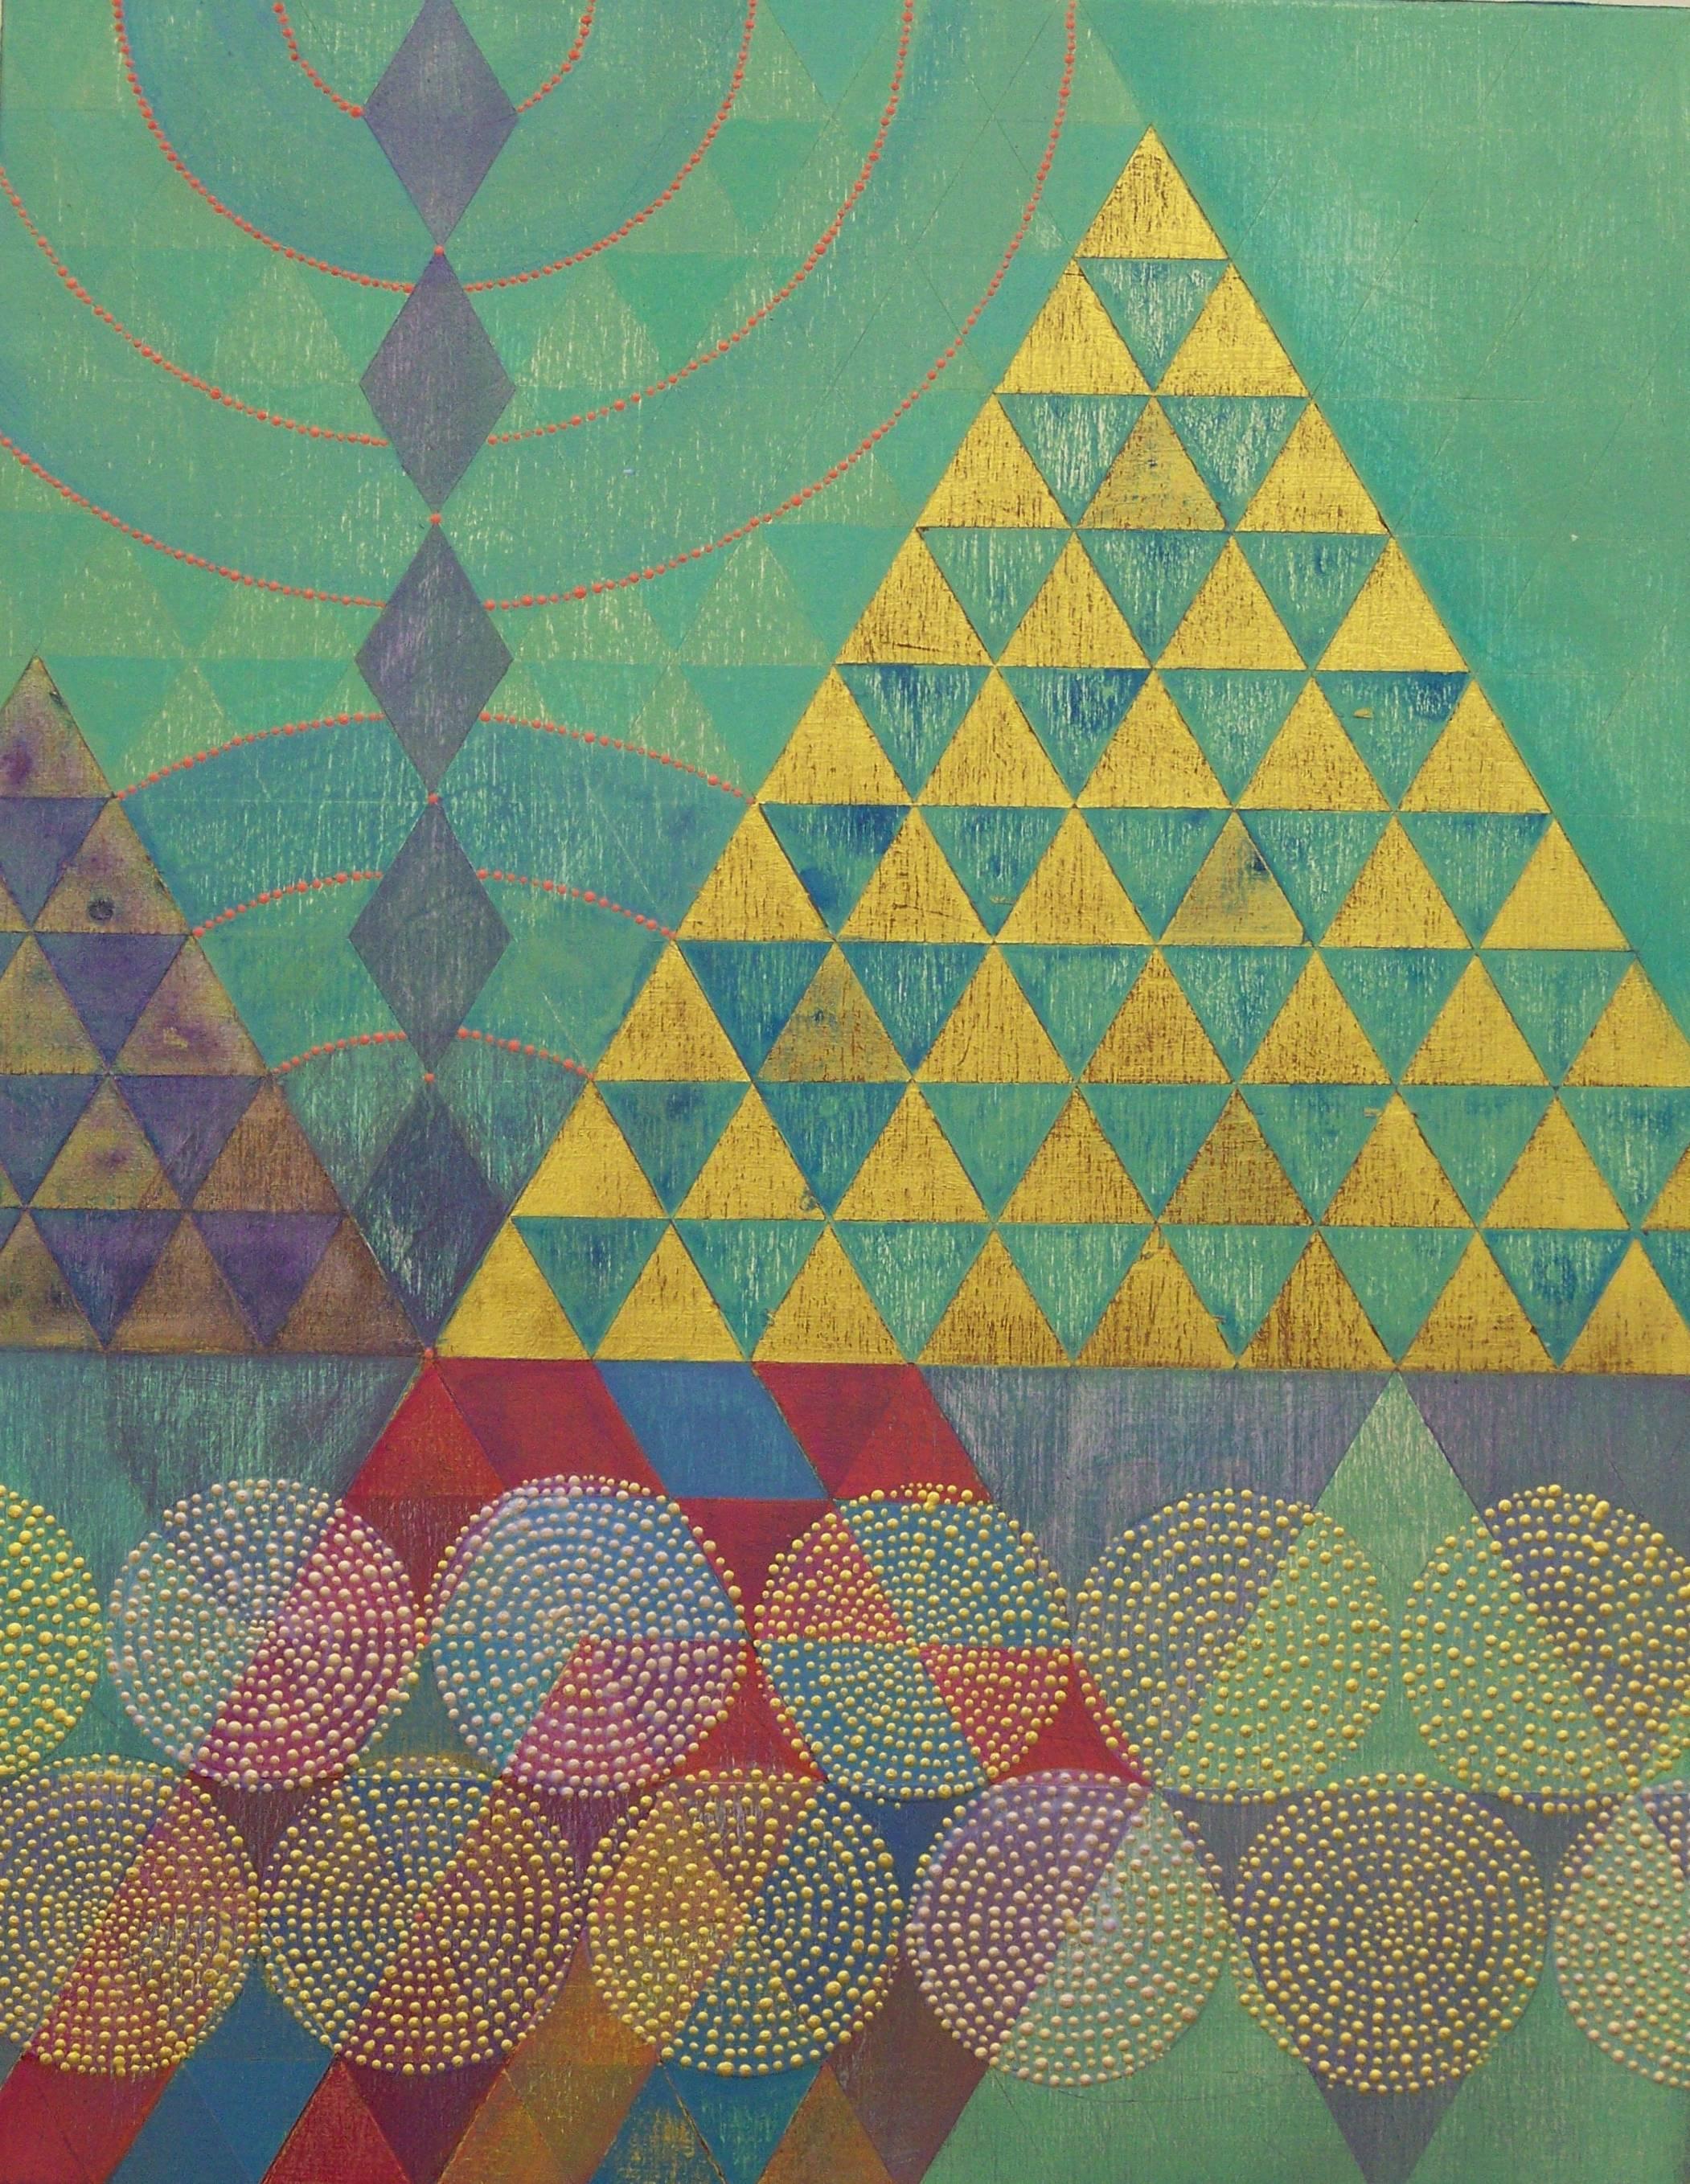 "Triangles 6", abstract, geometric, green, gold, red, blue, acrylic painting - Painting by Denise Driscoll